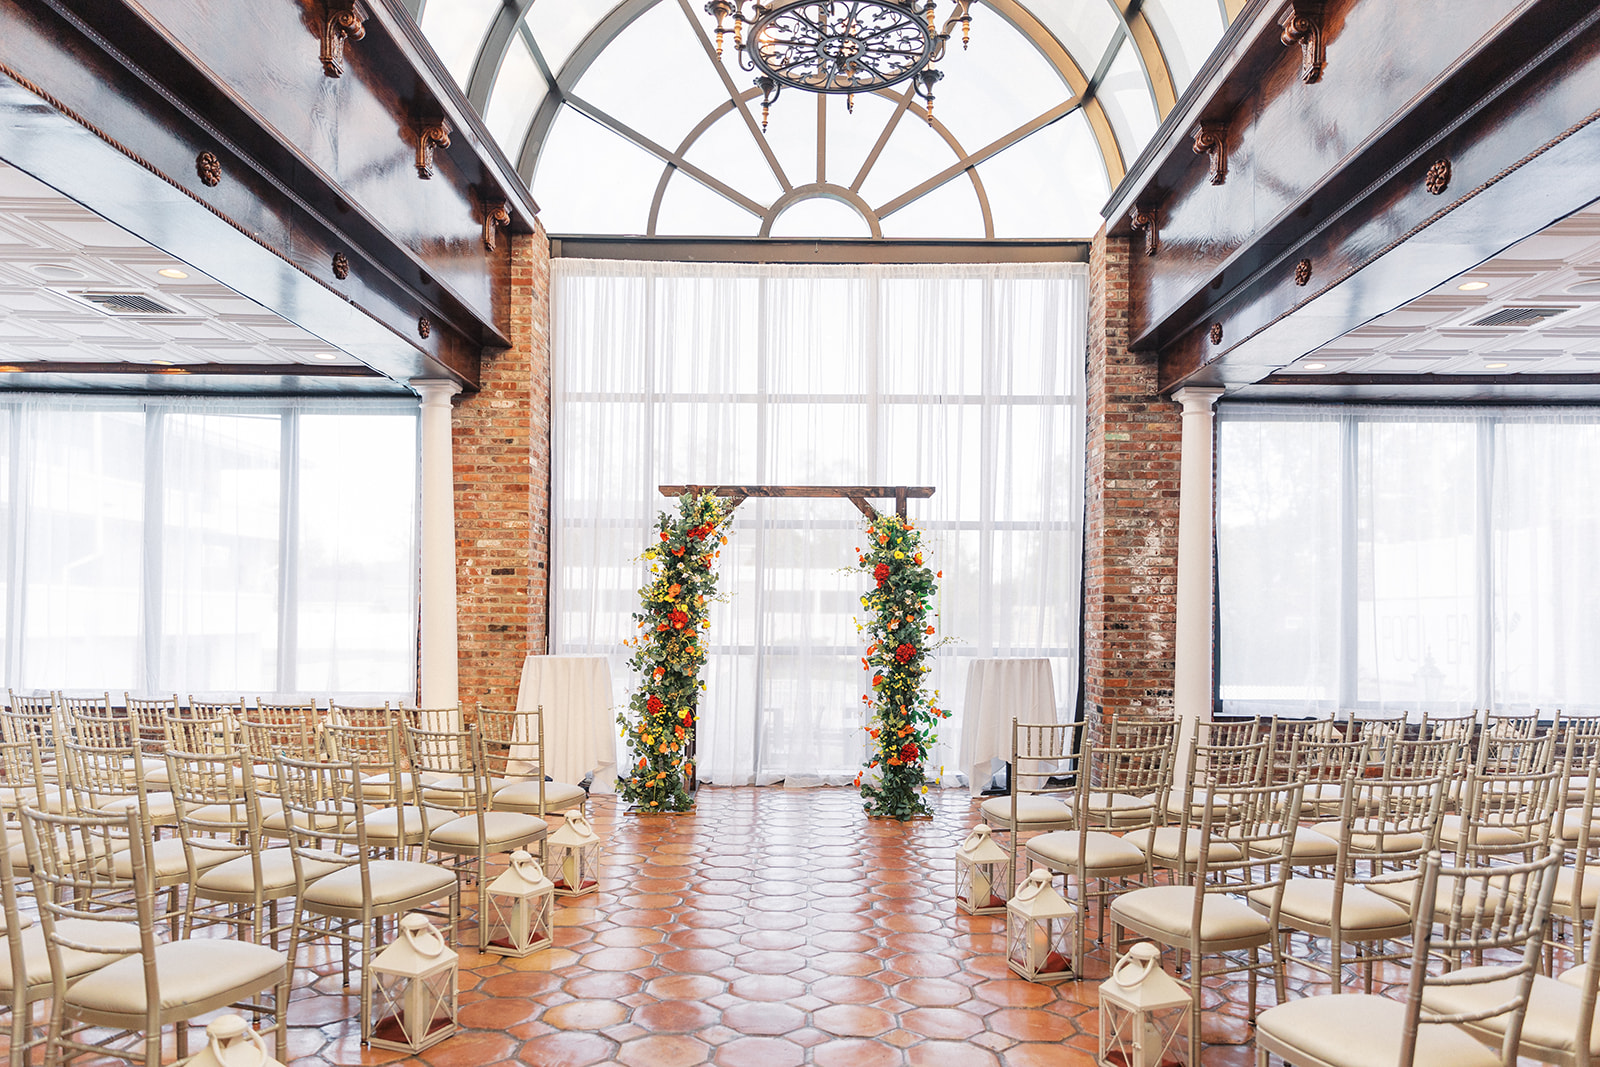 Details of a wedding ceremony set up with gold chairs and a flower covered arbor at The Shore Club Boutique Hotel